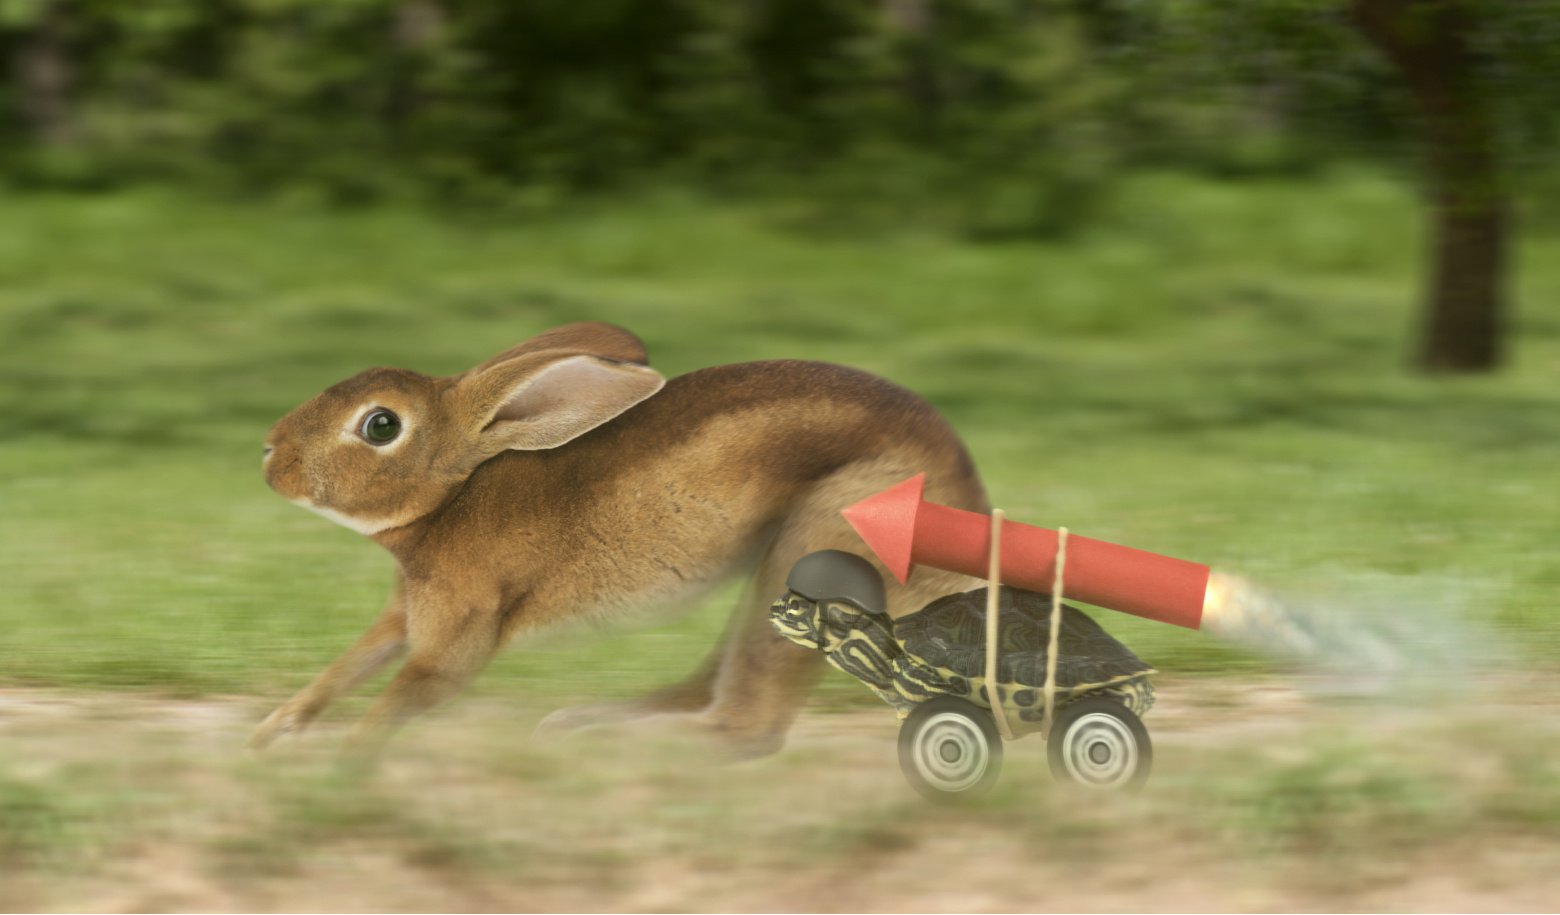 A hare tries to outrace a tortoise with a rocket strapped to its back and wheels for feet